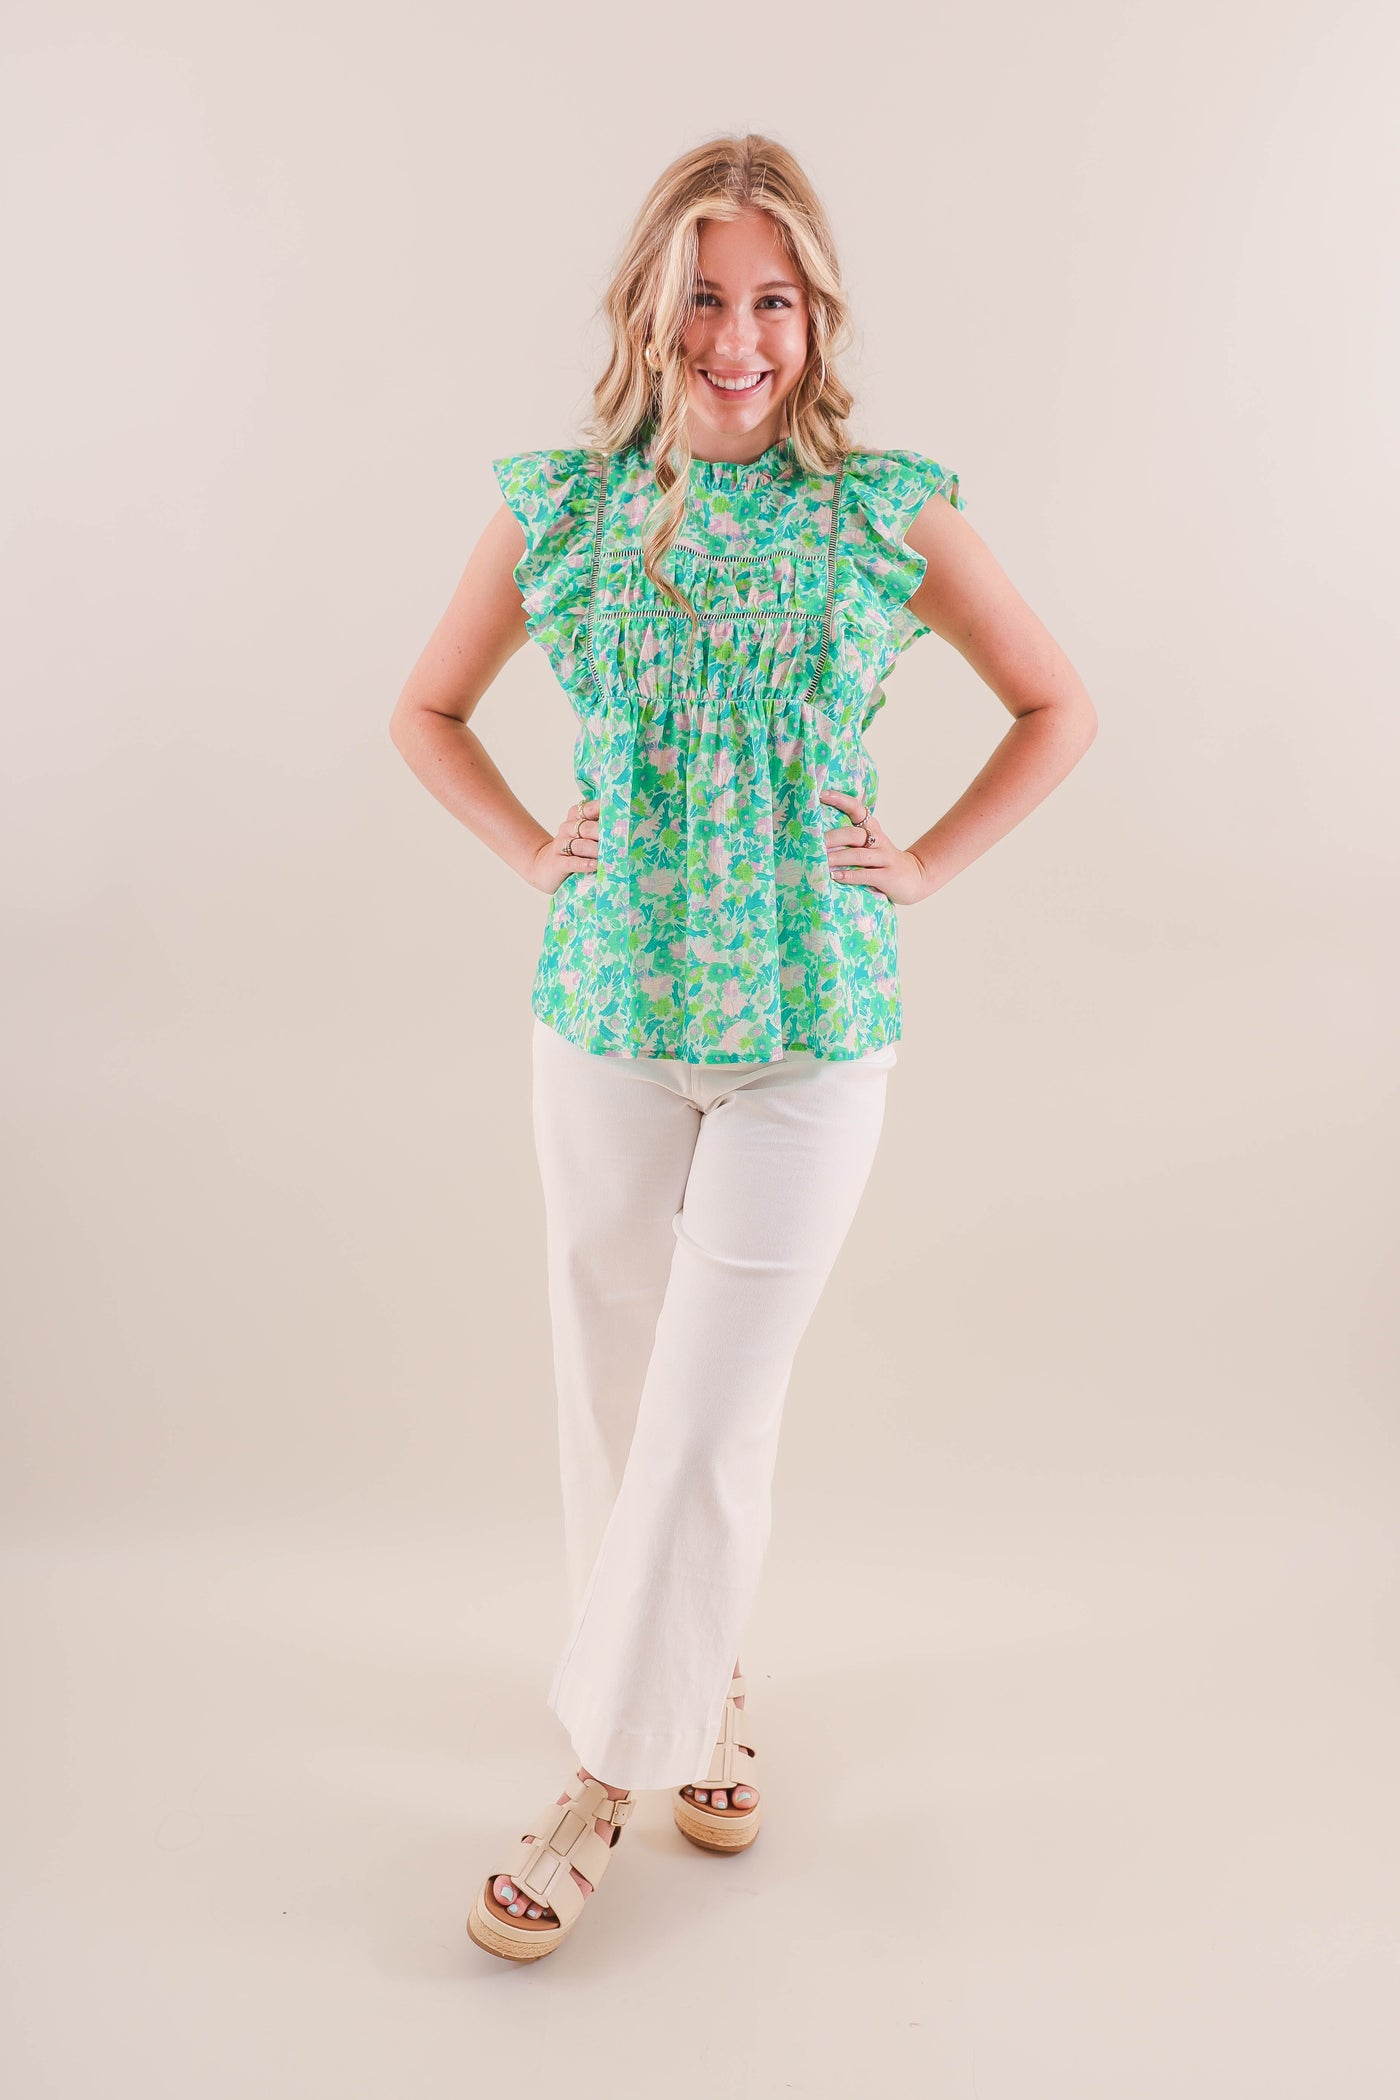 Green Babydoll Style Top- Women's Preppy Tops- Women's Colorful Blouse